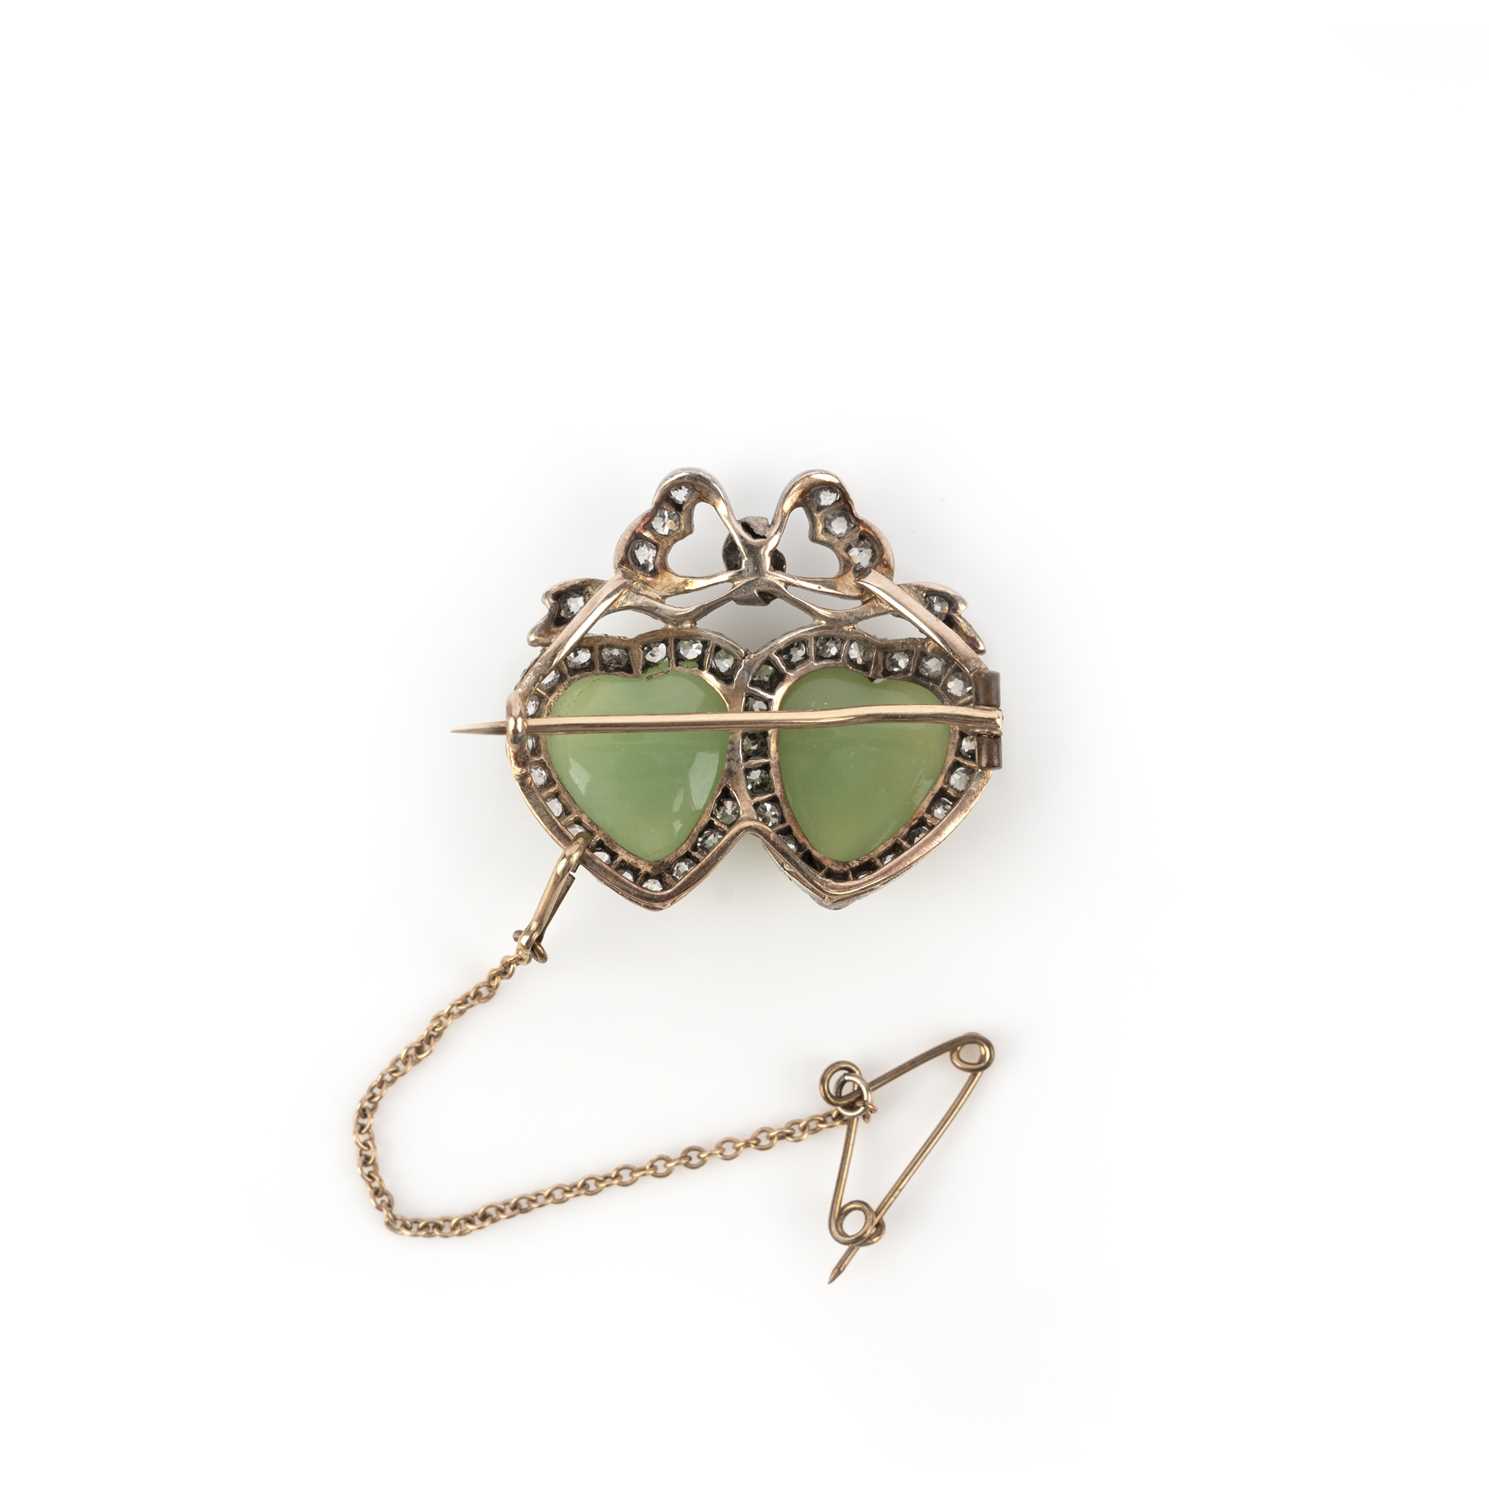 A Victorian chrysoprase and diamond brooch, late 19th century, designed as two hearts surmounted - Image 2 of 2